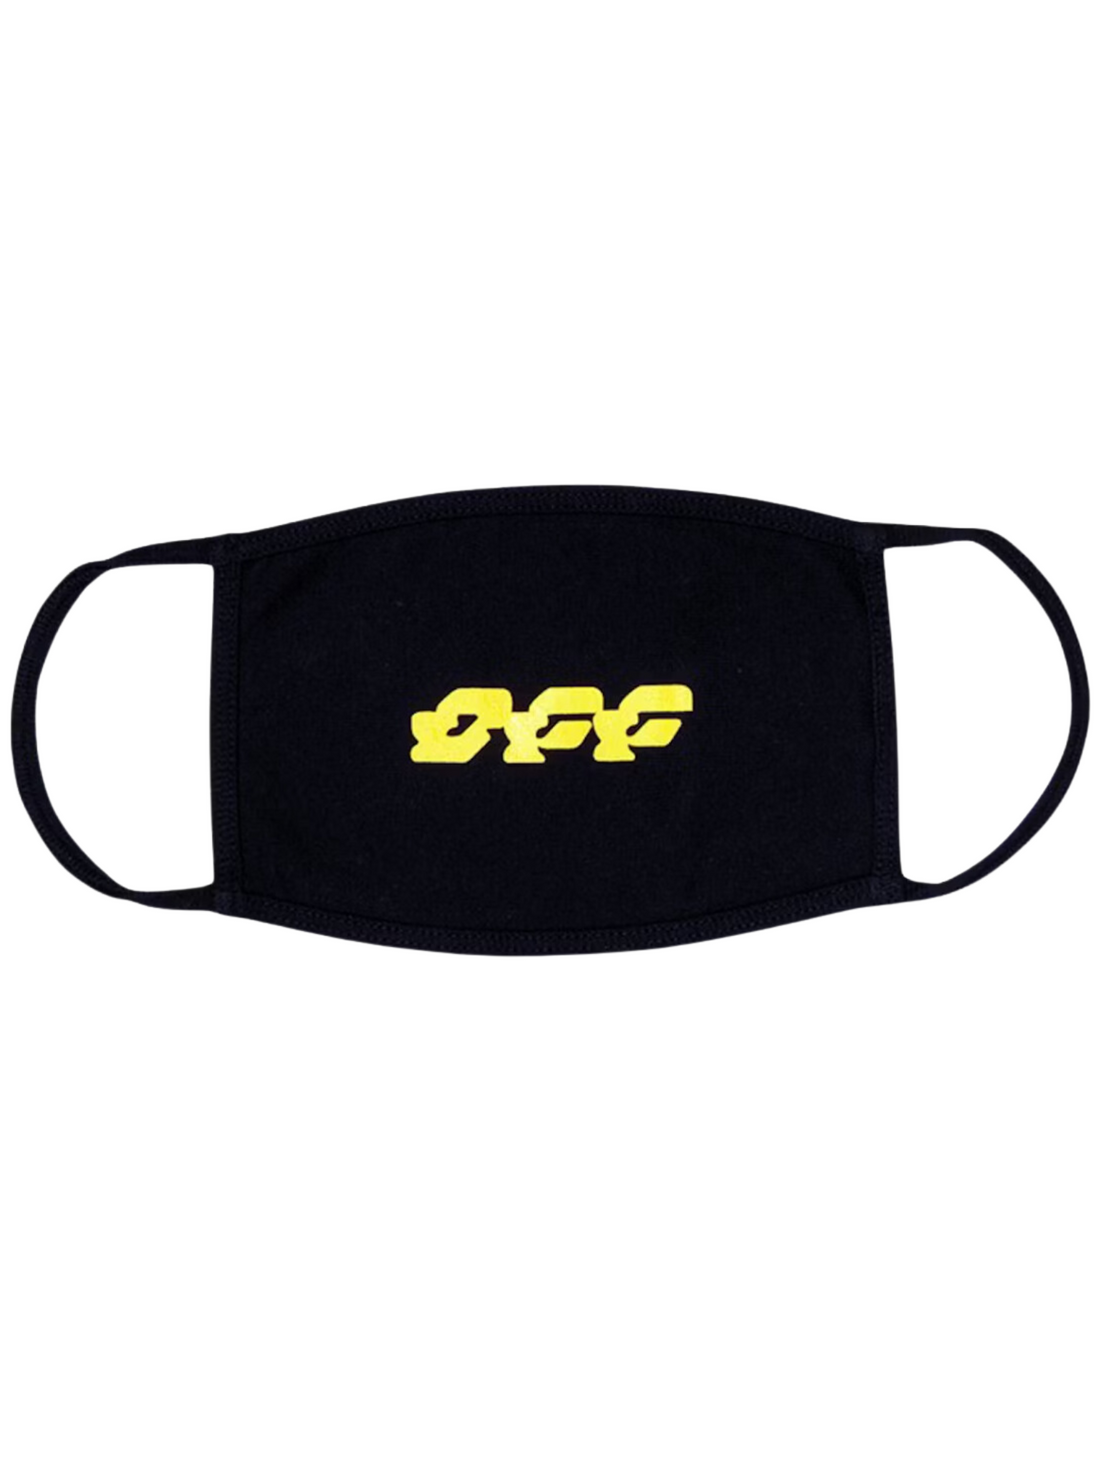 OFF-WHITE Disrupted Face Mask Black/Yellow